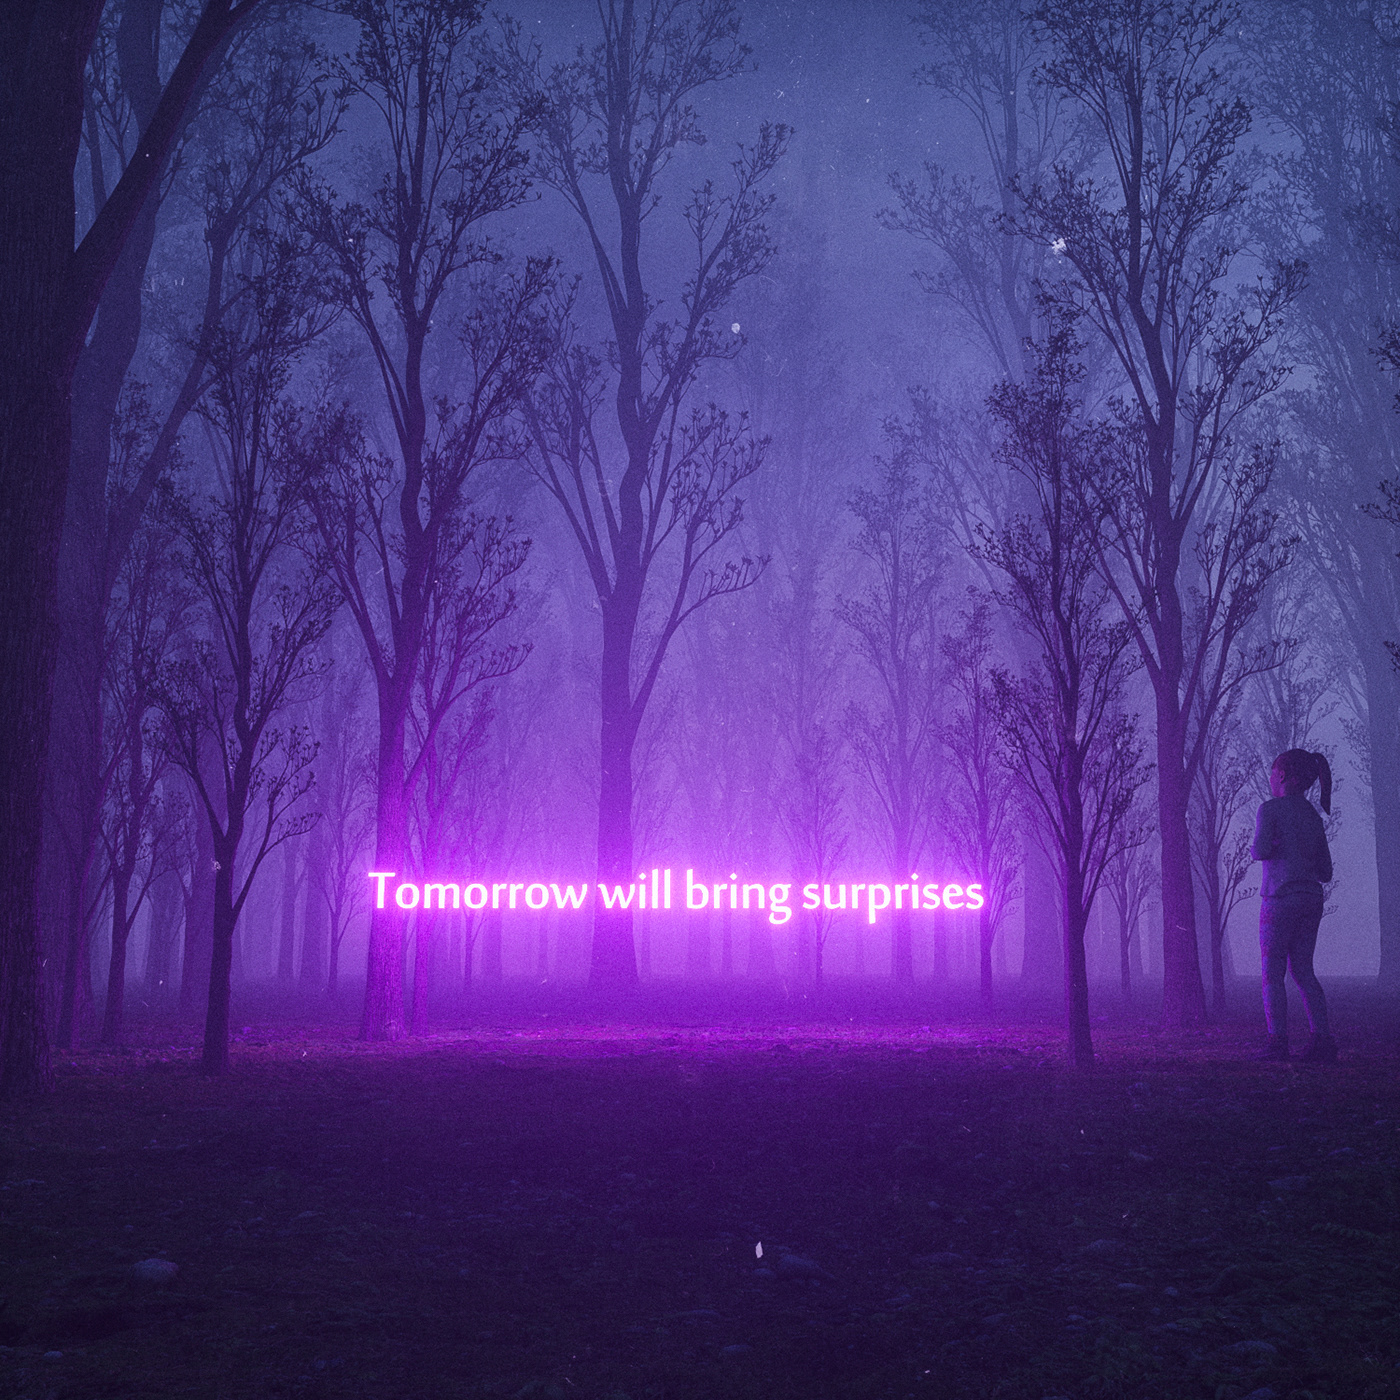 Image may contain: tree, fog and purple